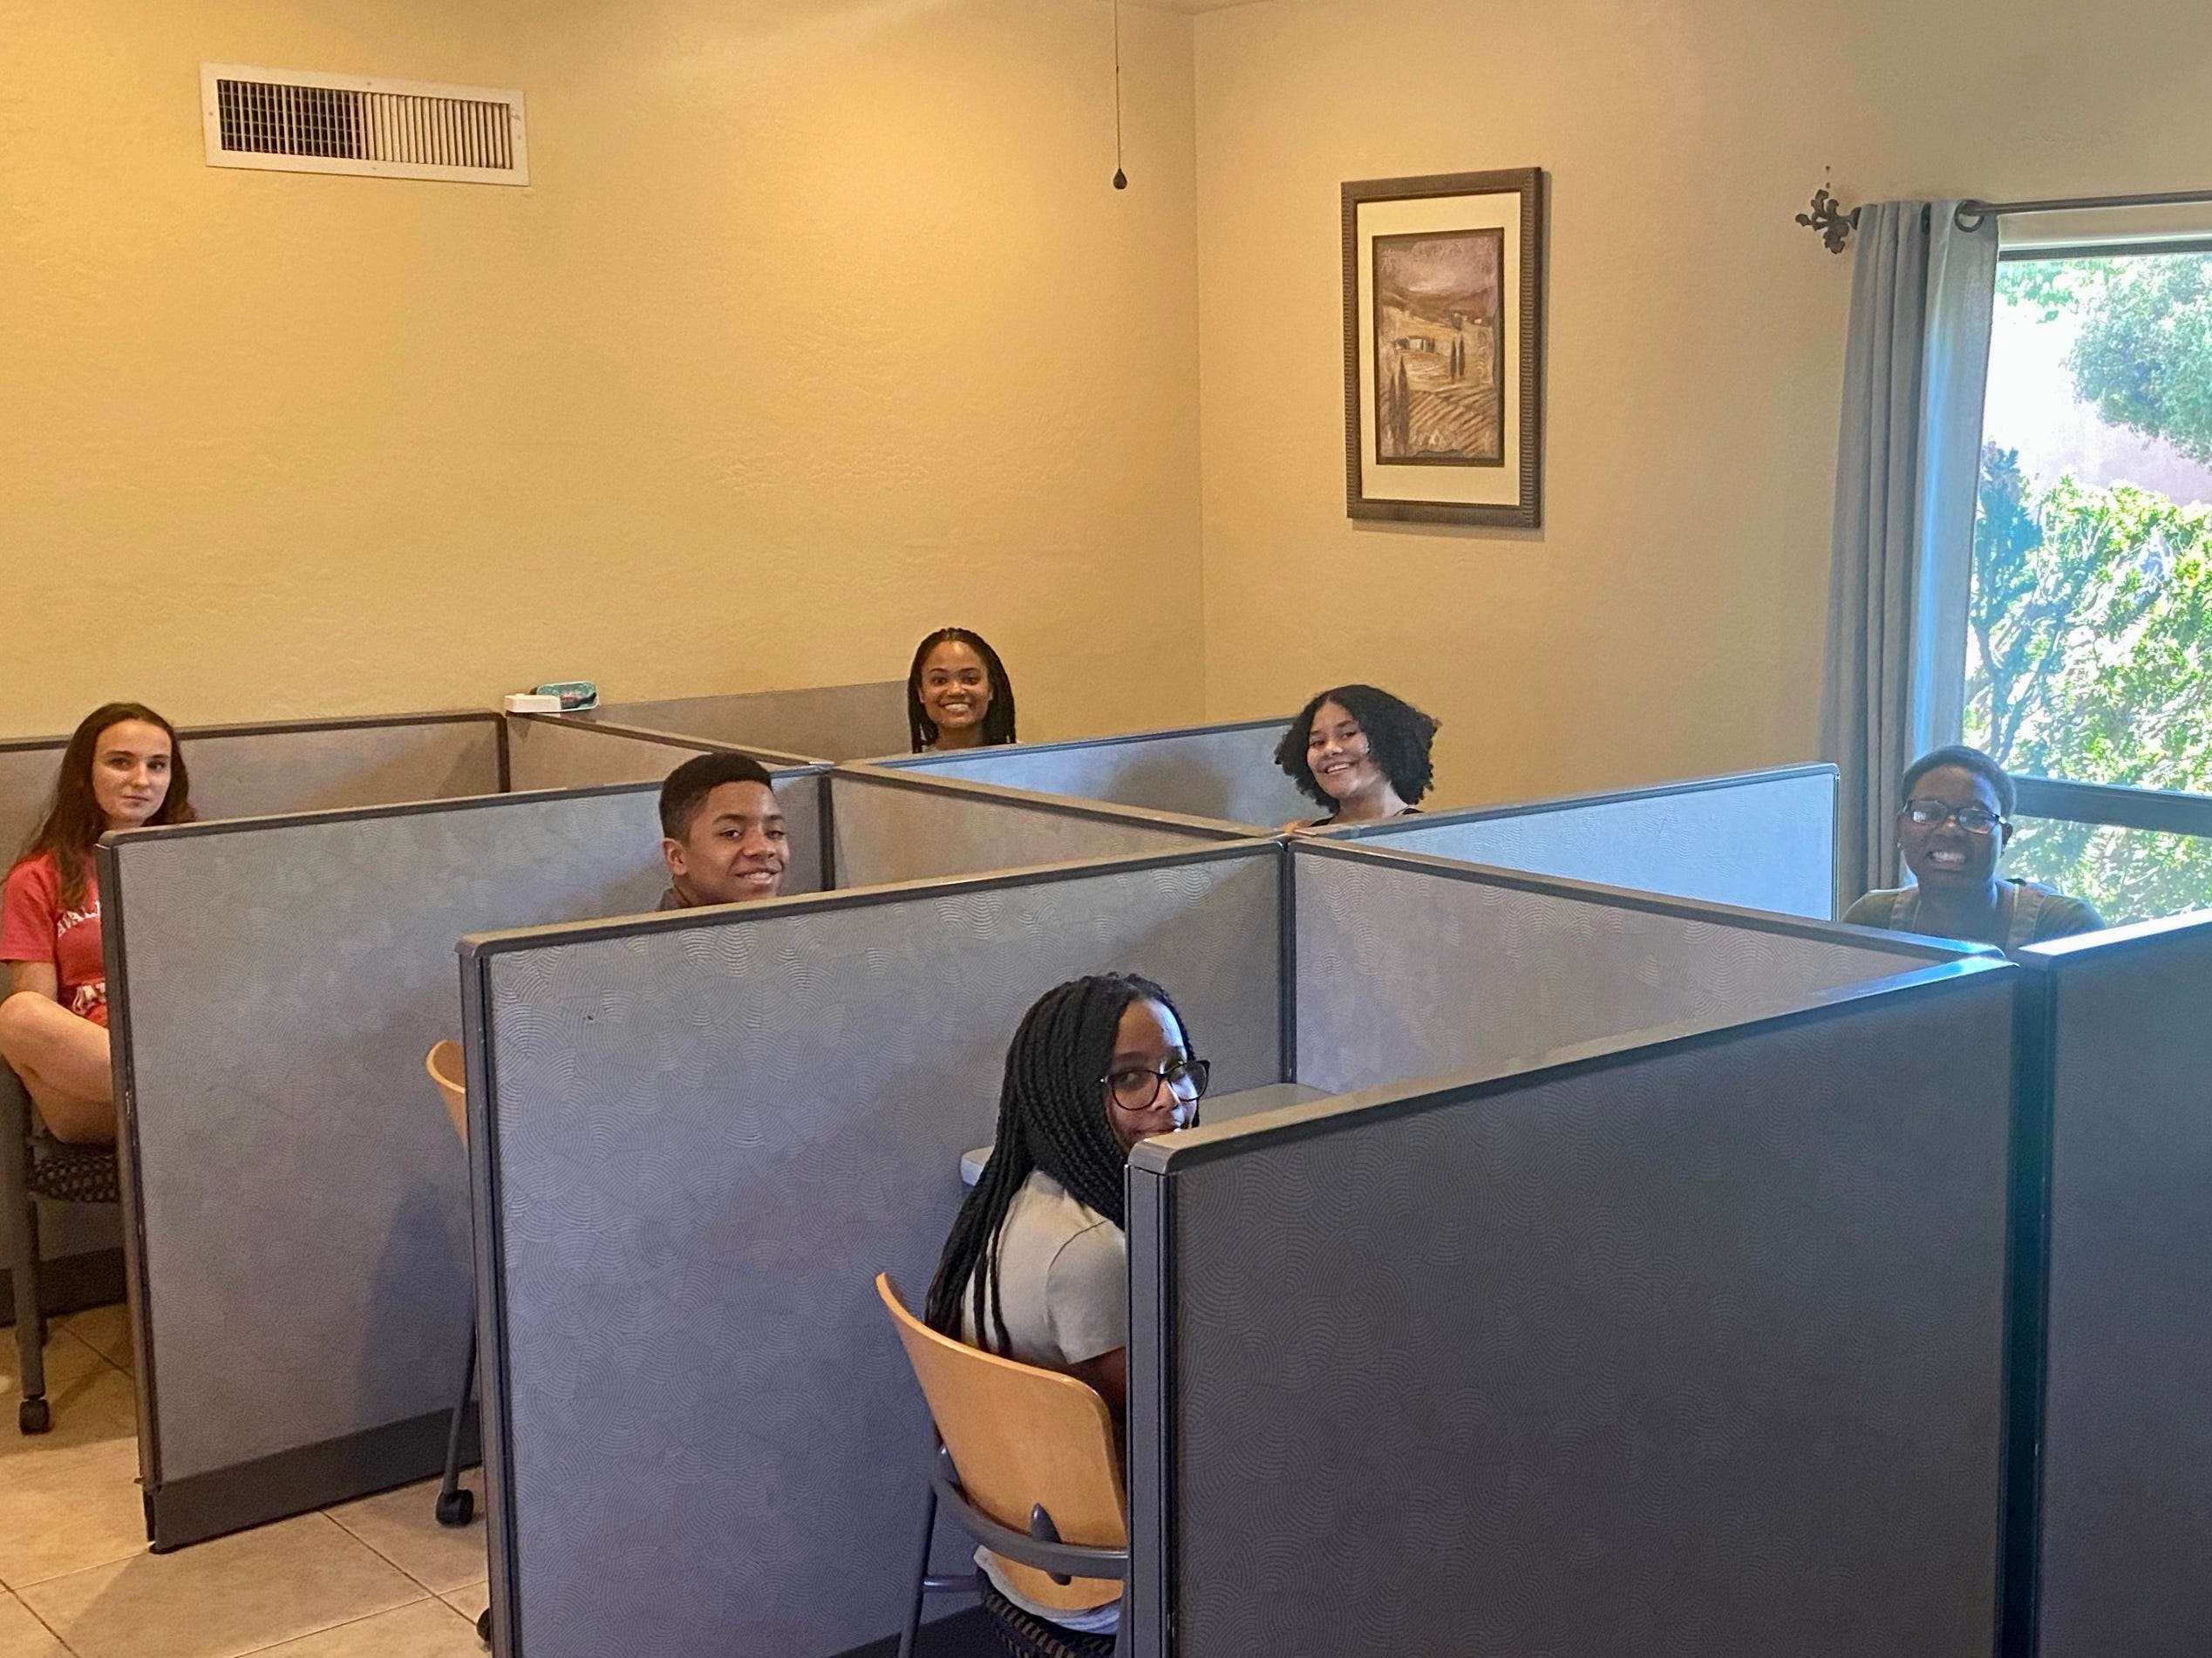 A Mom Of 8 Used Office Cubicles To Turn Her Lounge Into A Classroom For Remote Learning